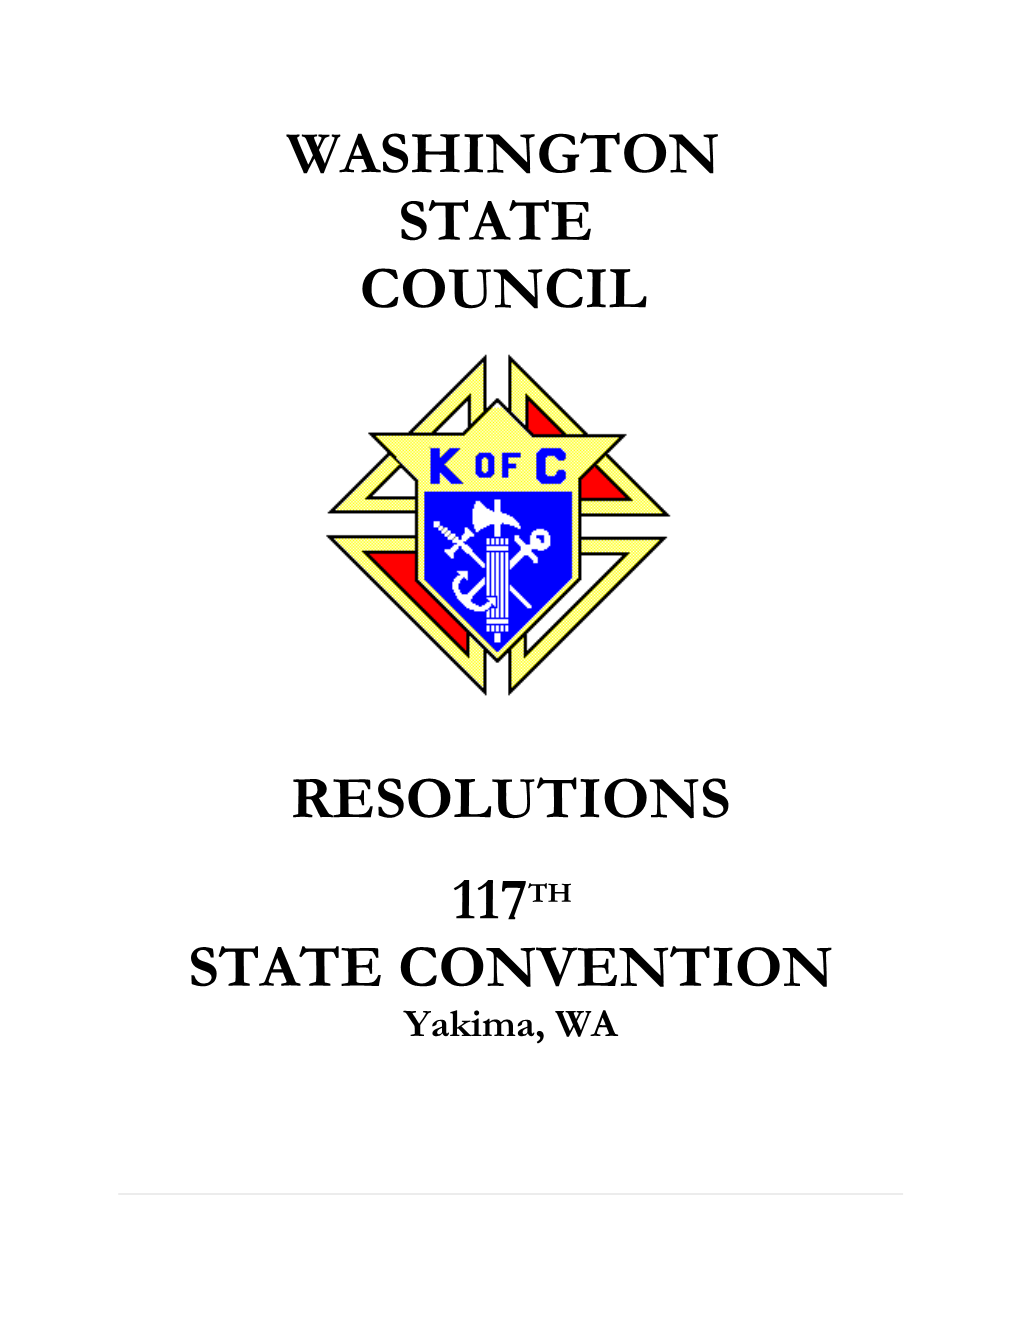 Proposed Resolutions